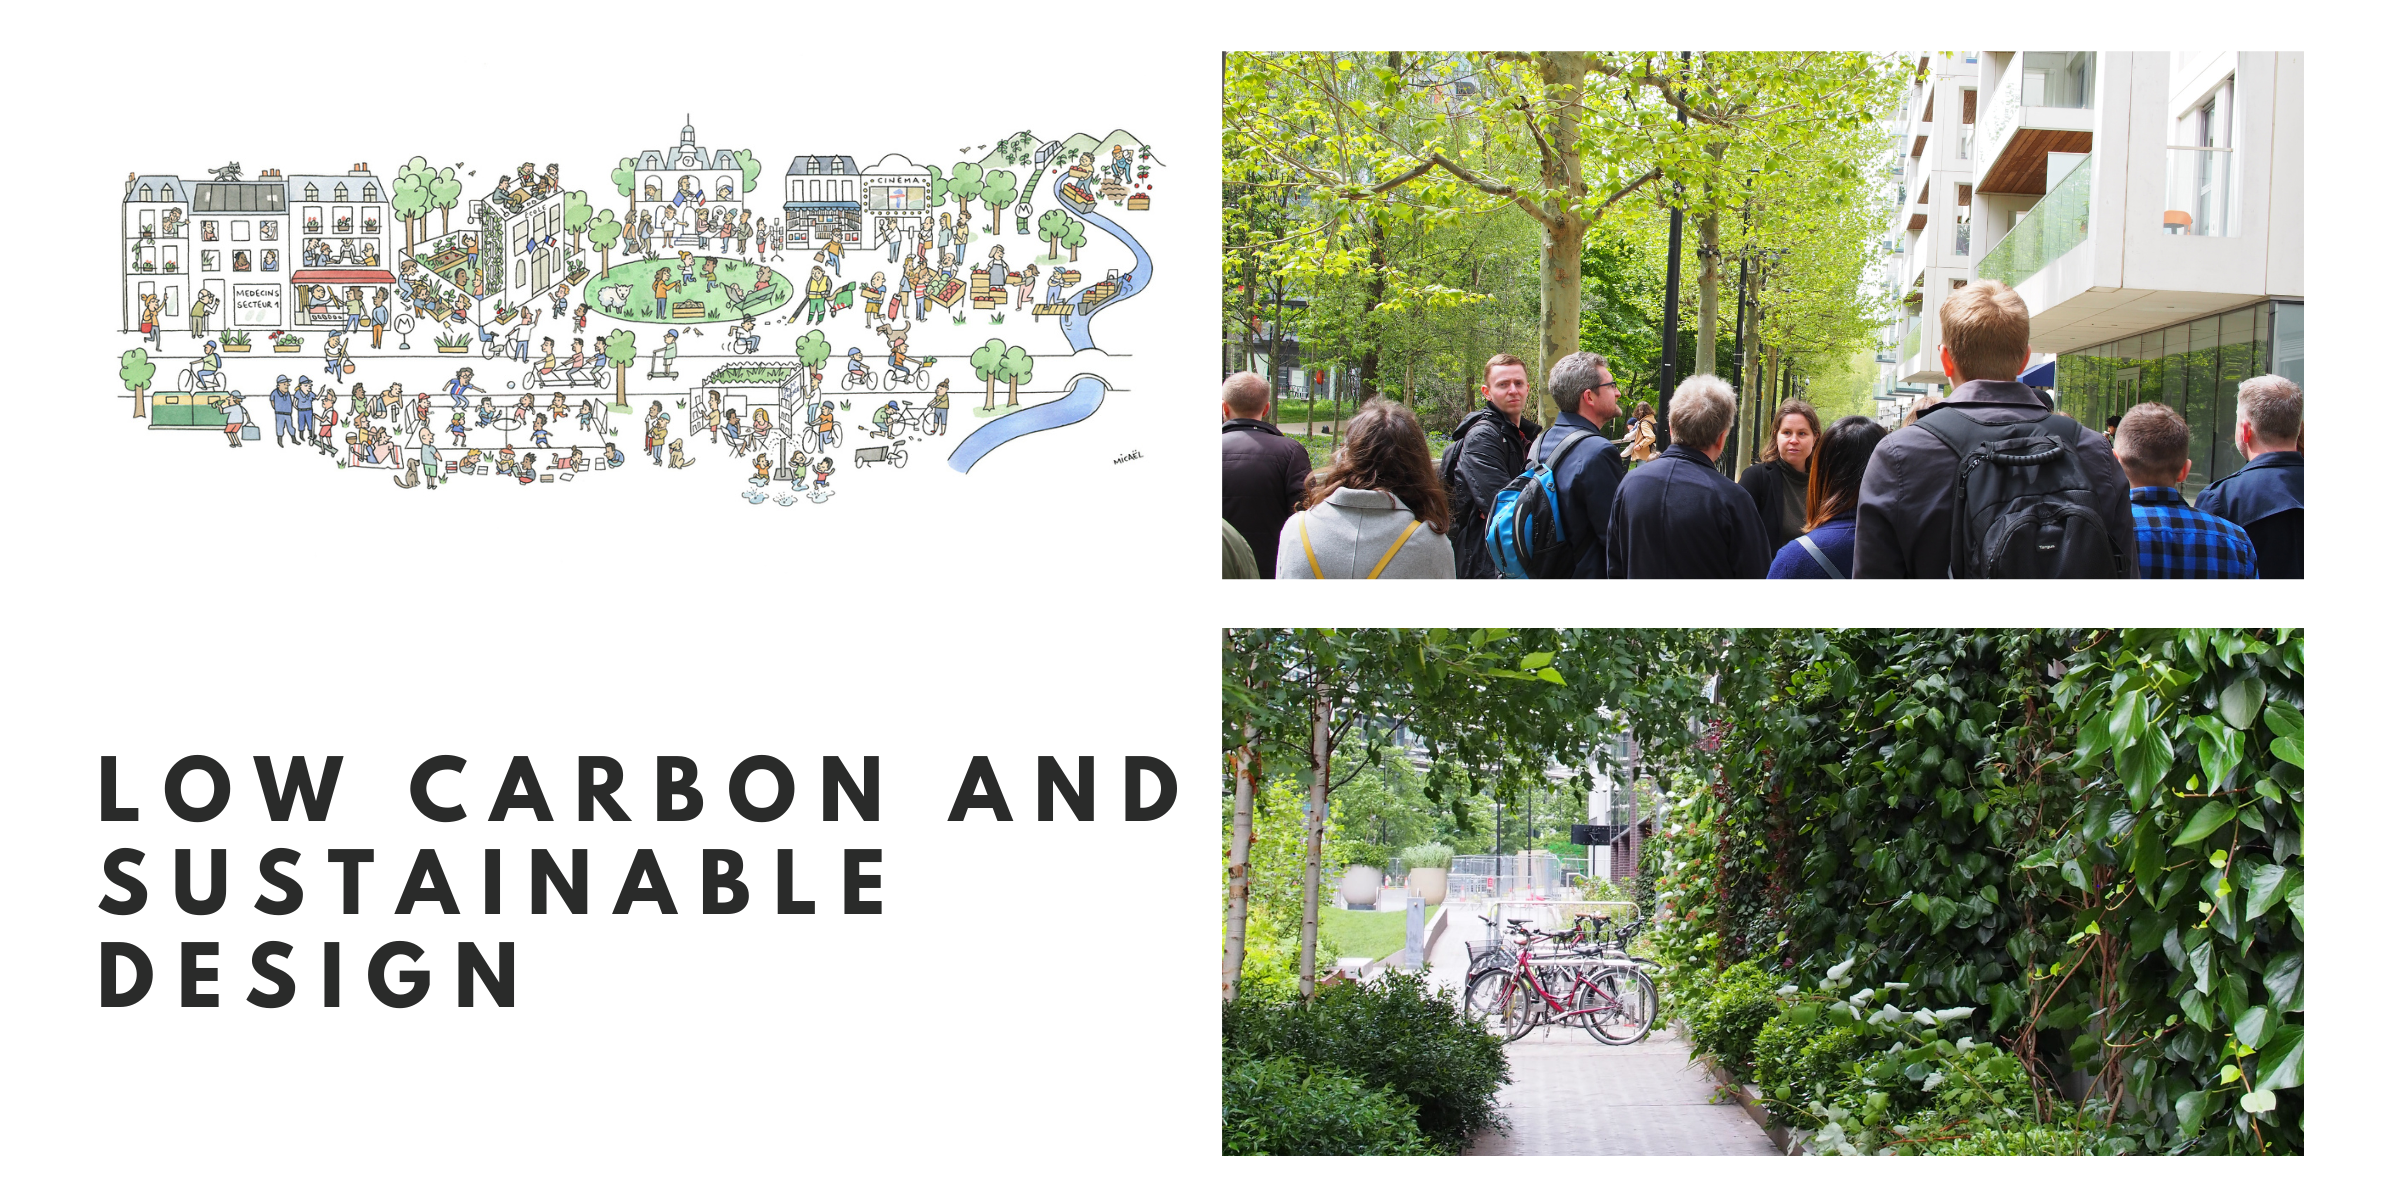 Design South East – Low Carbon and Sustainable Design